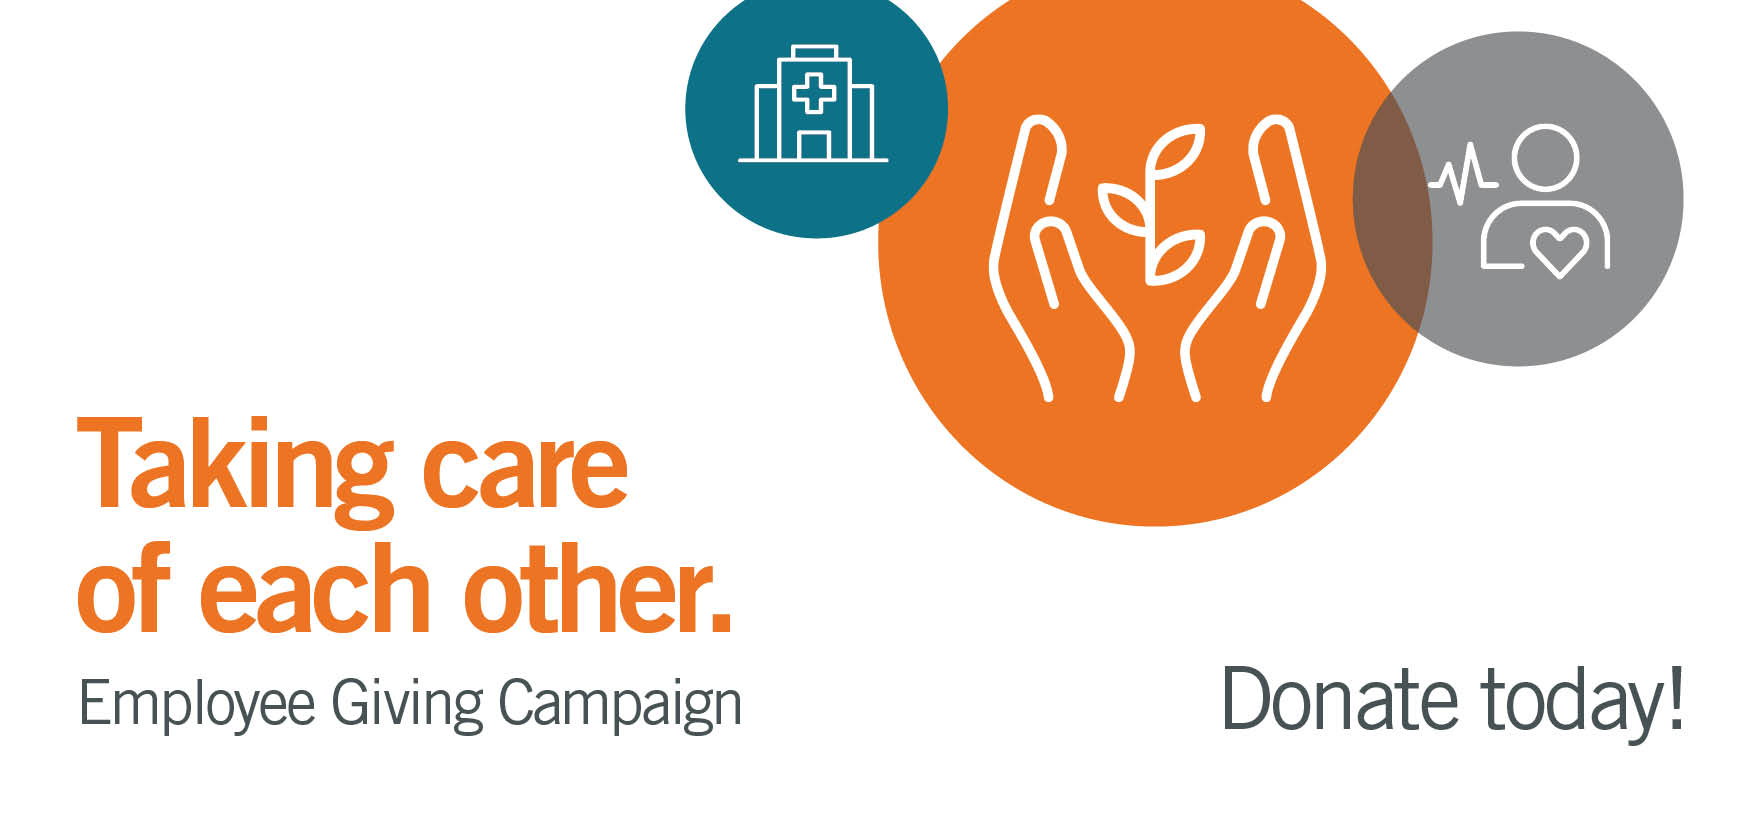 Icon graphics representing hospitals and giving. Text reads "Taking care of each other. Employee Giving Campaign"